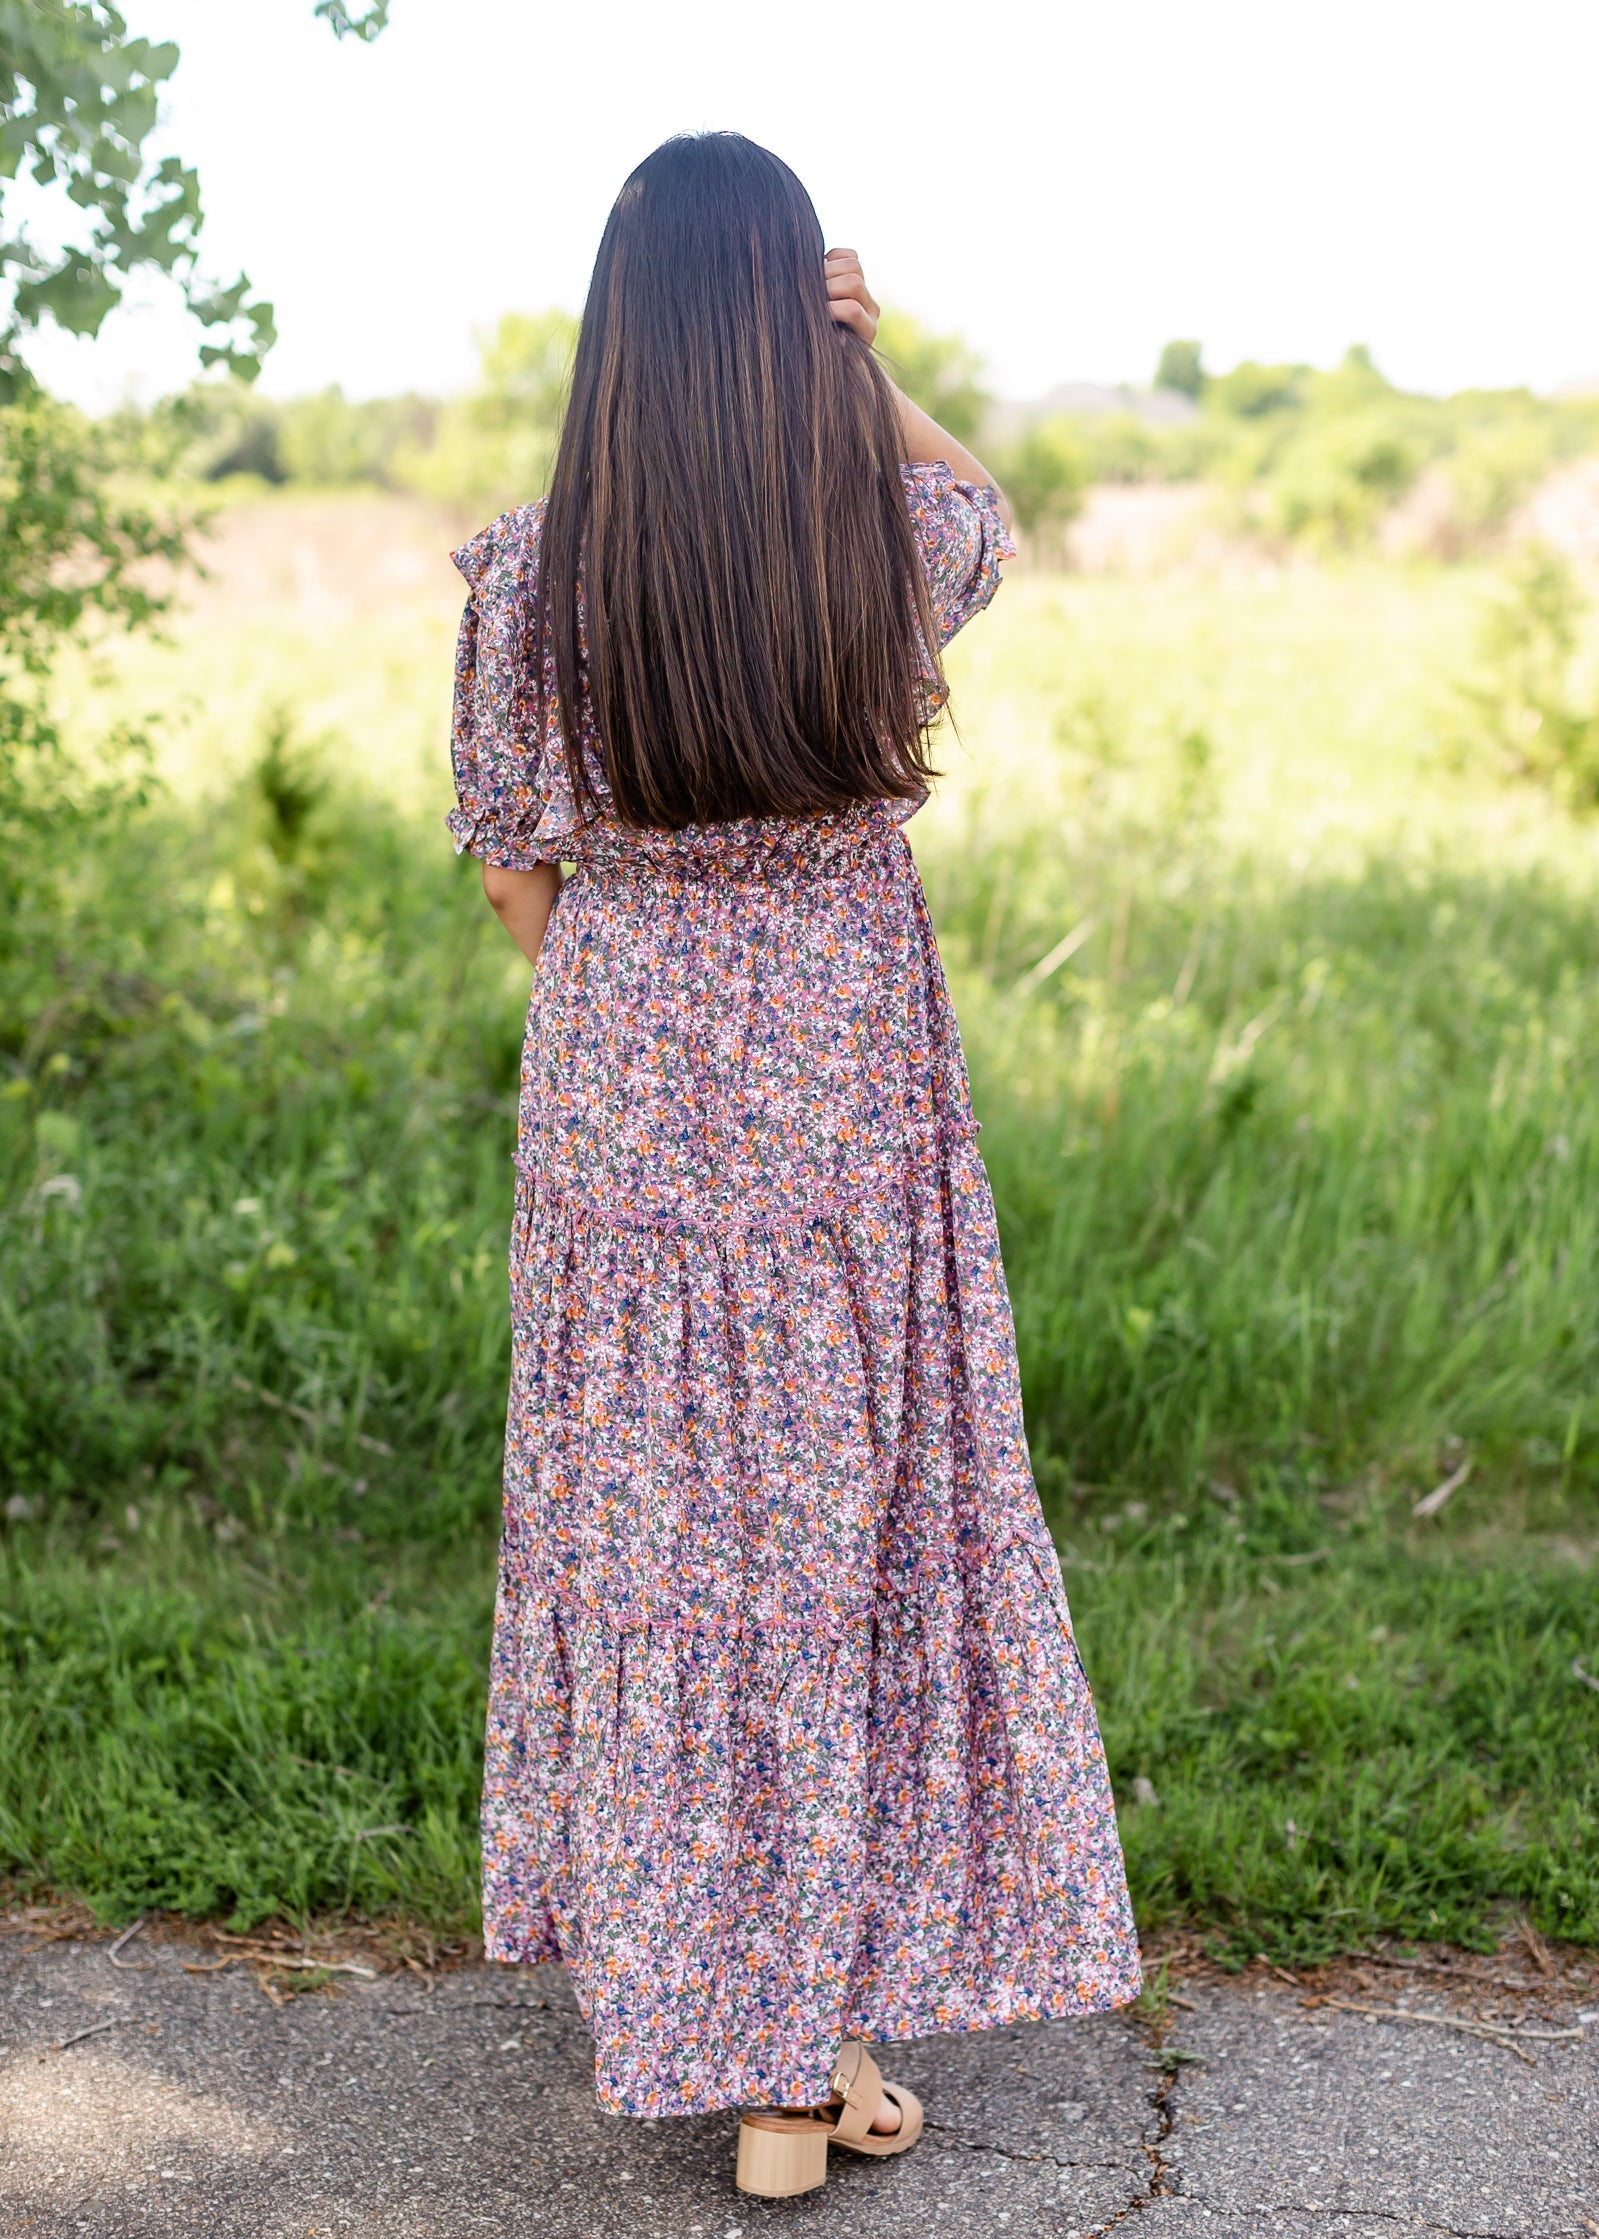 Ruffled Ditsy Floral Button Maxi Dress - FINAL SALE Dresses